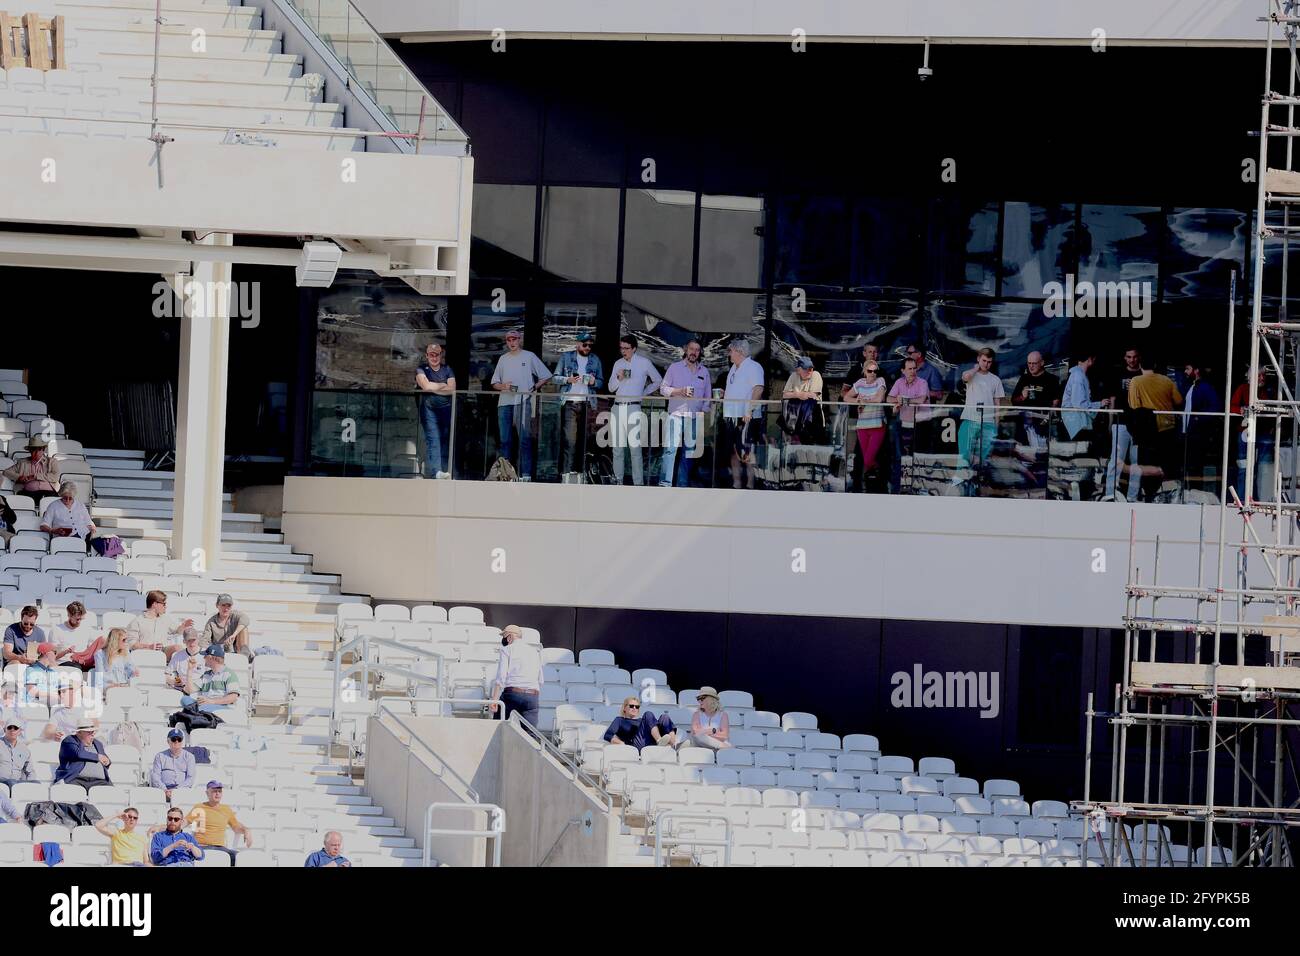 London, UK. 29 May, 2021. London, UK. Spectators on the new balcony enjoy cricket in the sun as Surrey take on Gloucestershire in the County Championship at the Kia Oval, day three David Rowe/Alamy Live News Stock Photo